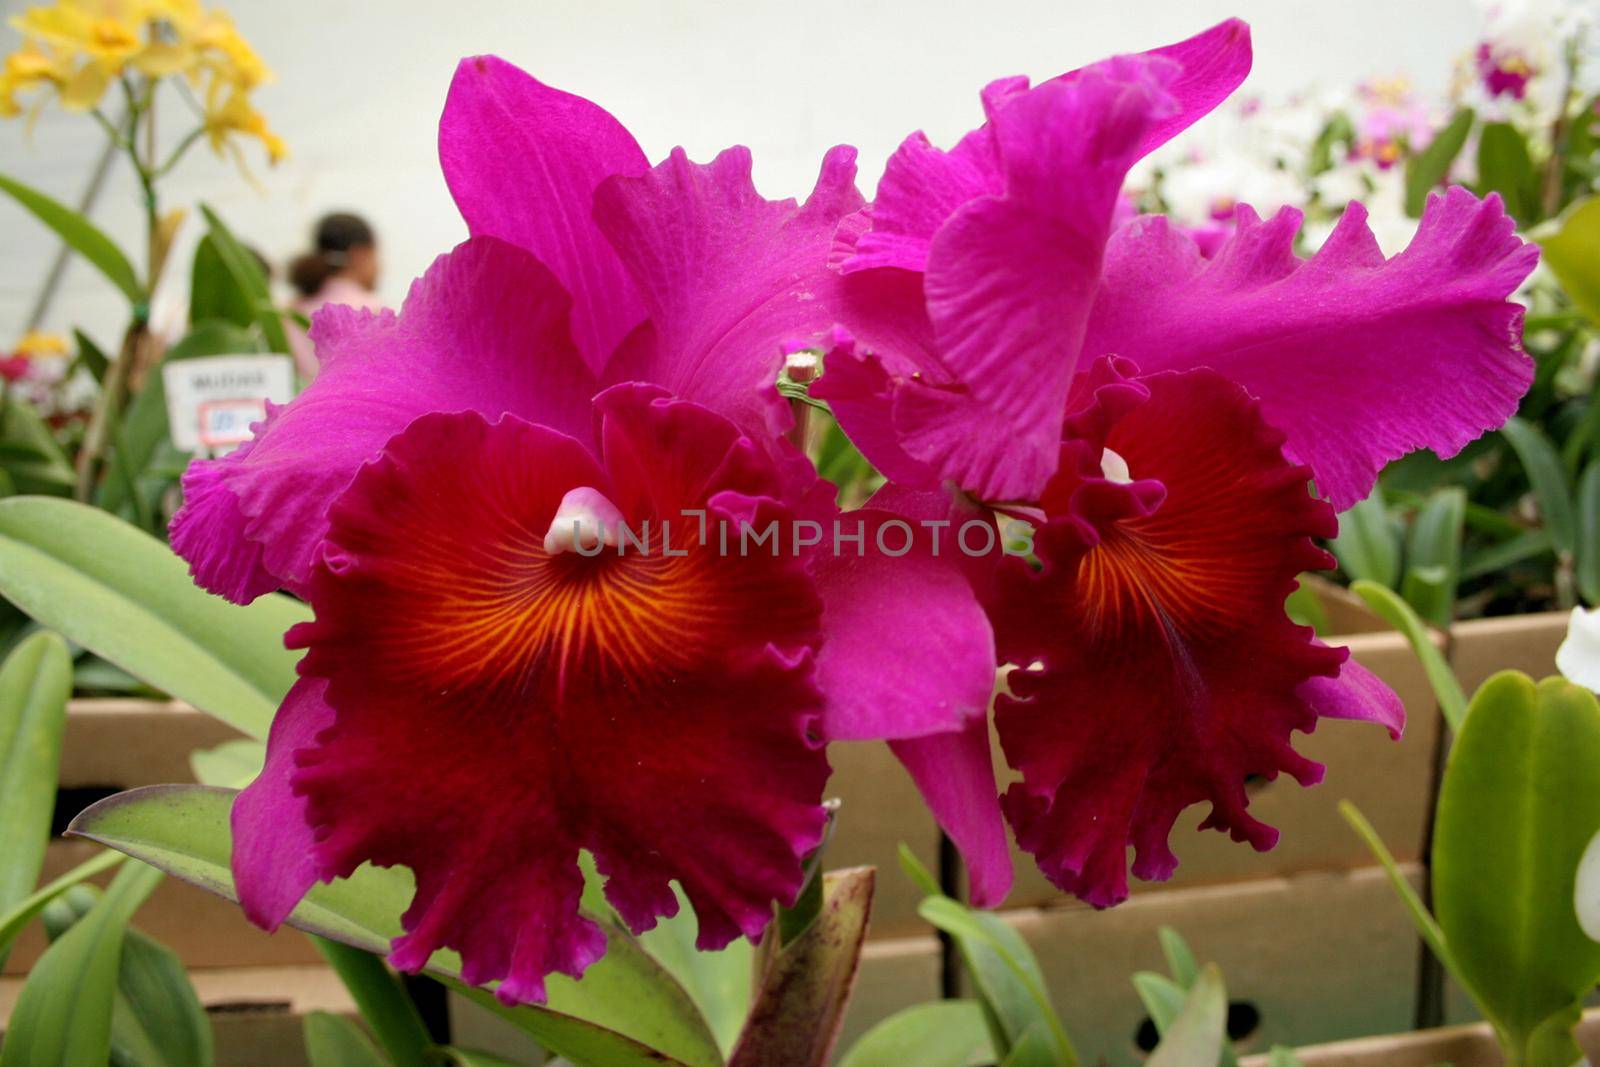 salvador, bahia / brazil - august 24, 2006: People are seen during orchid fair held at Itororo Dike in Salvador.